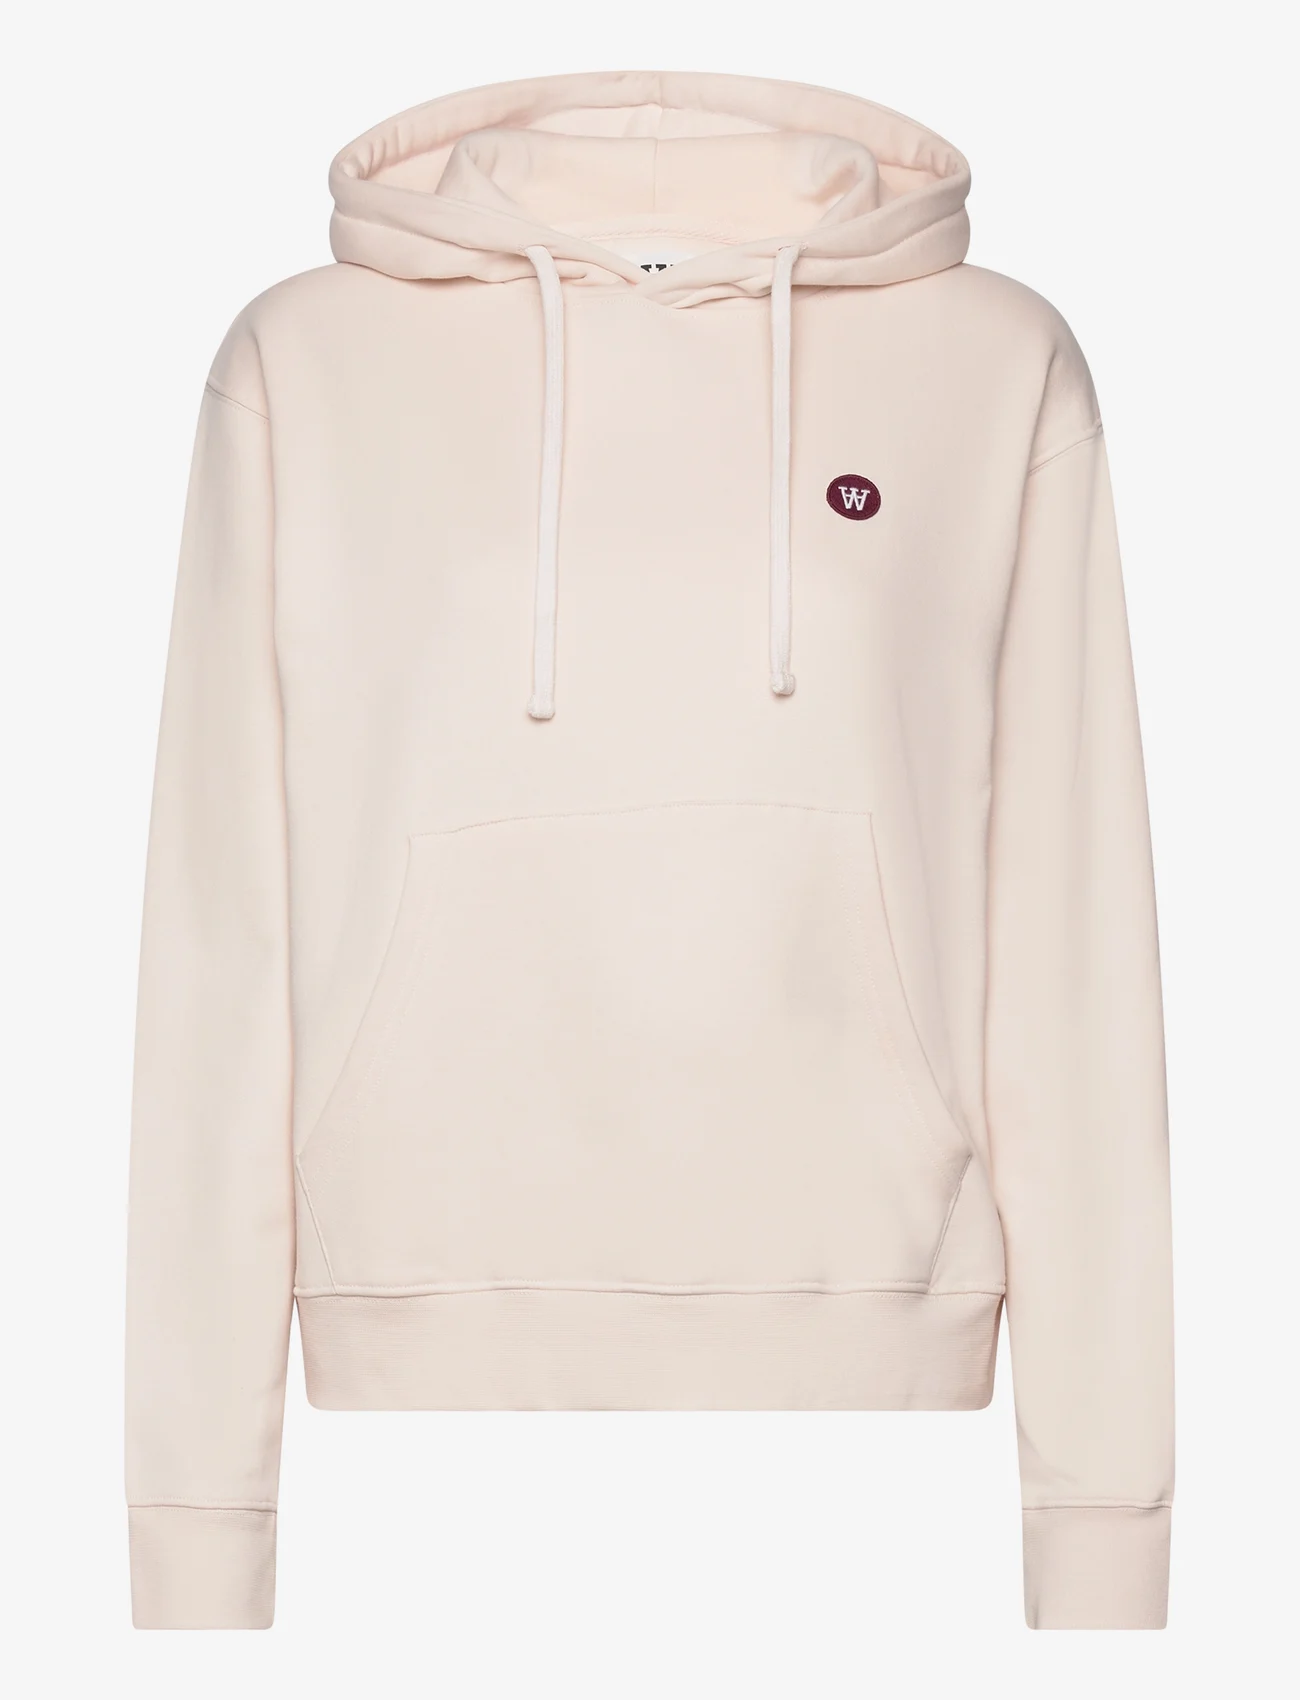 Double A by Wood Wood - Jenn Chest Print Hoodie - hettegensere - almost mauve - 0